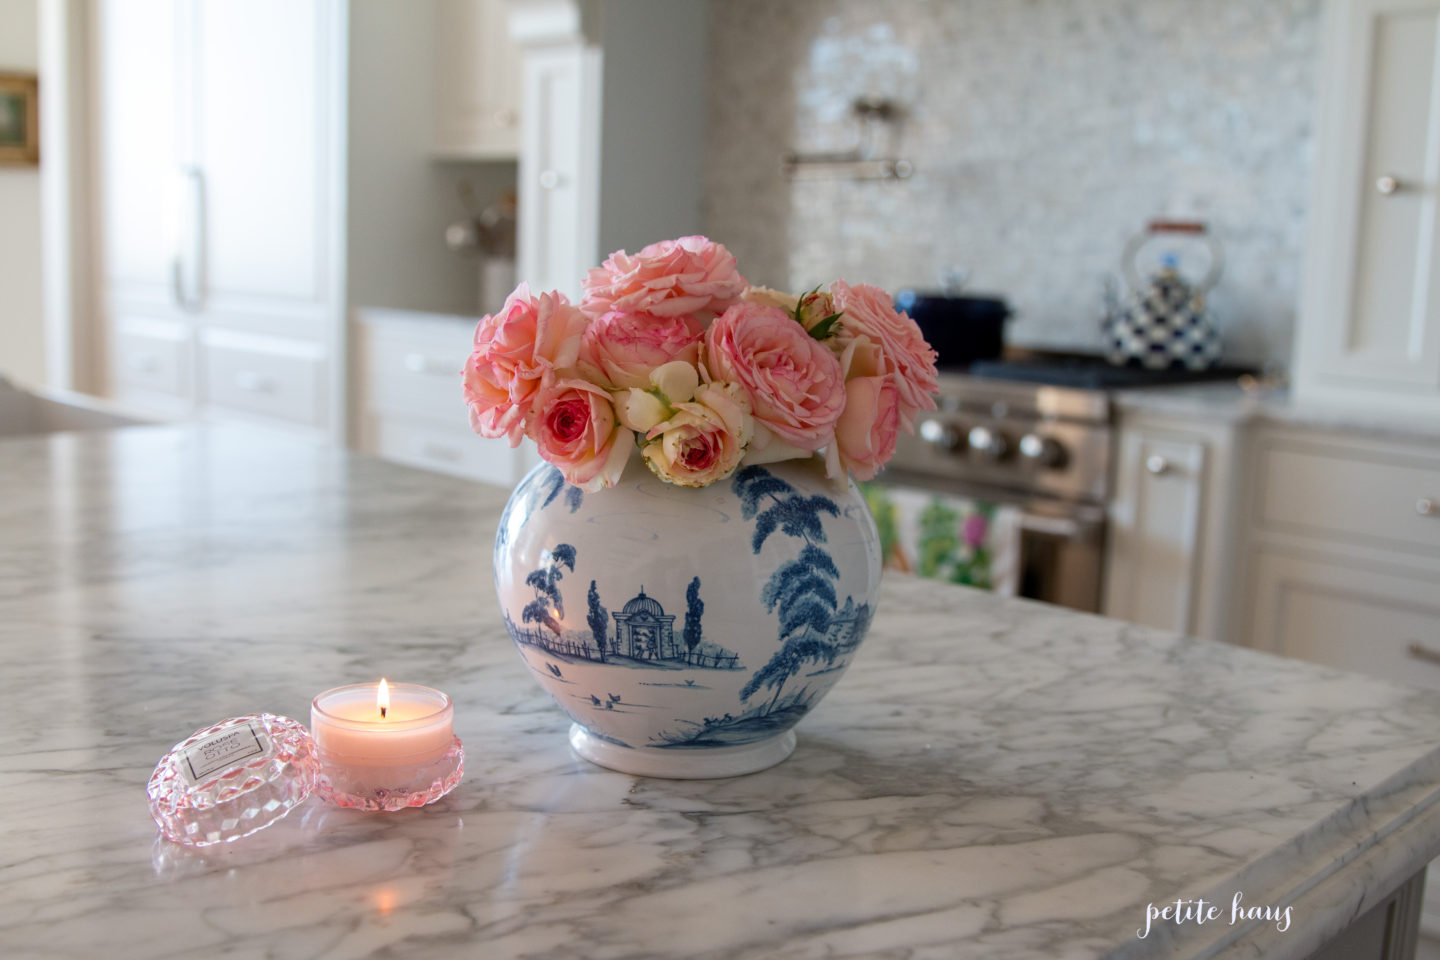 Summer with Roses and Gingerjars